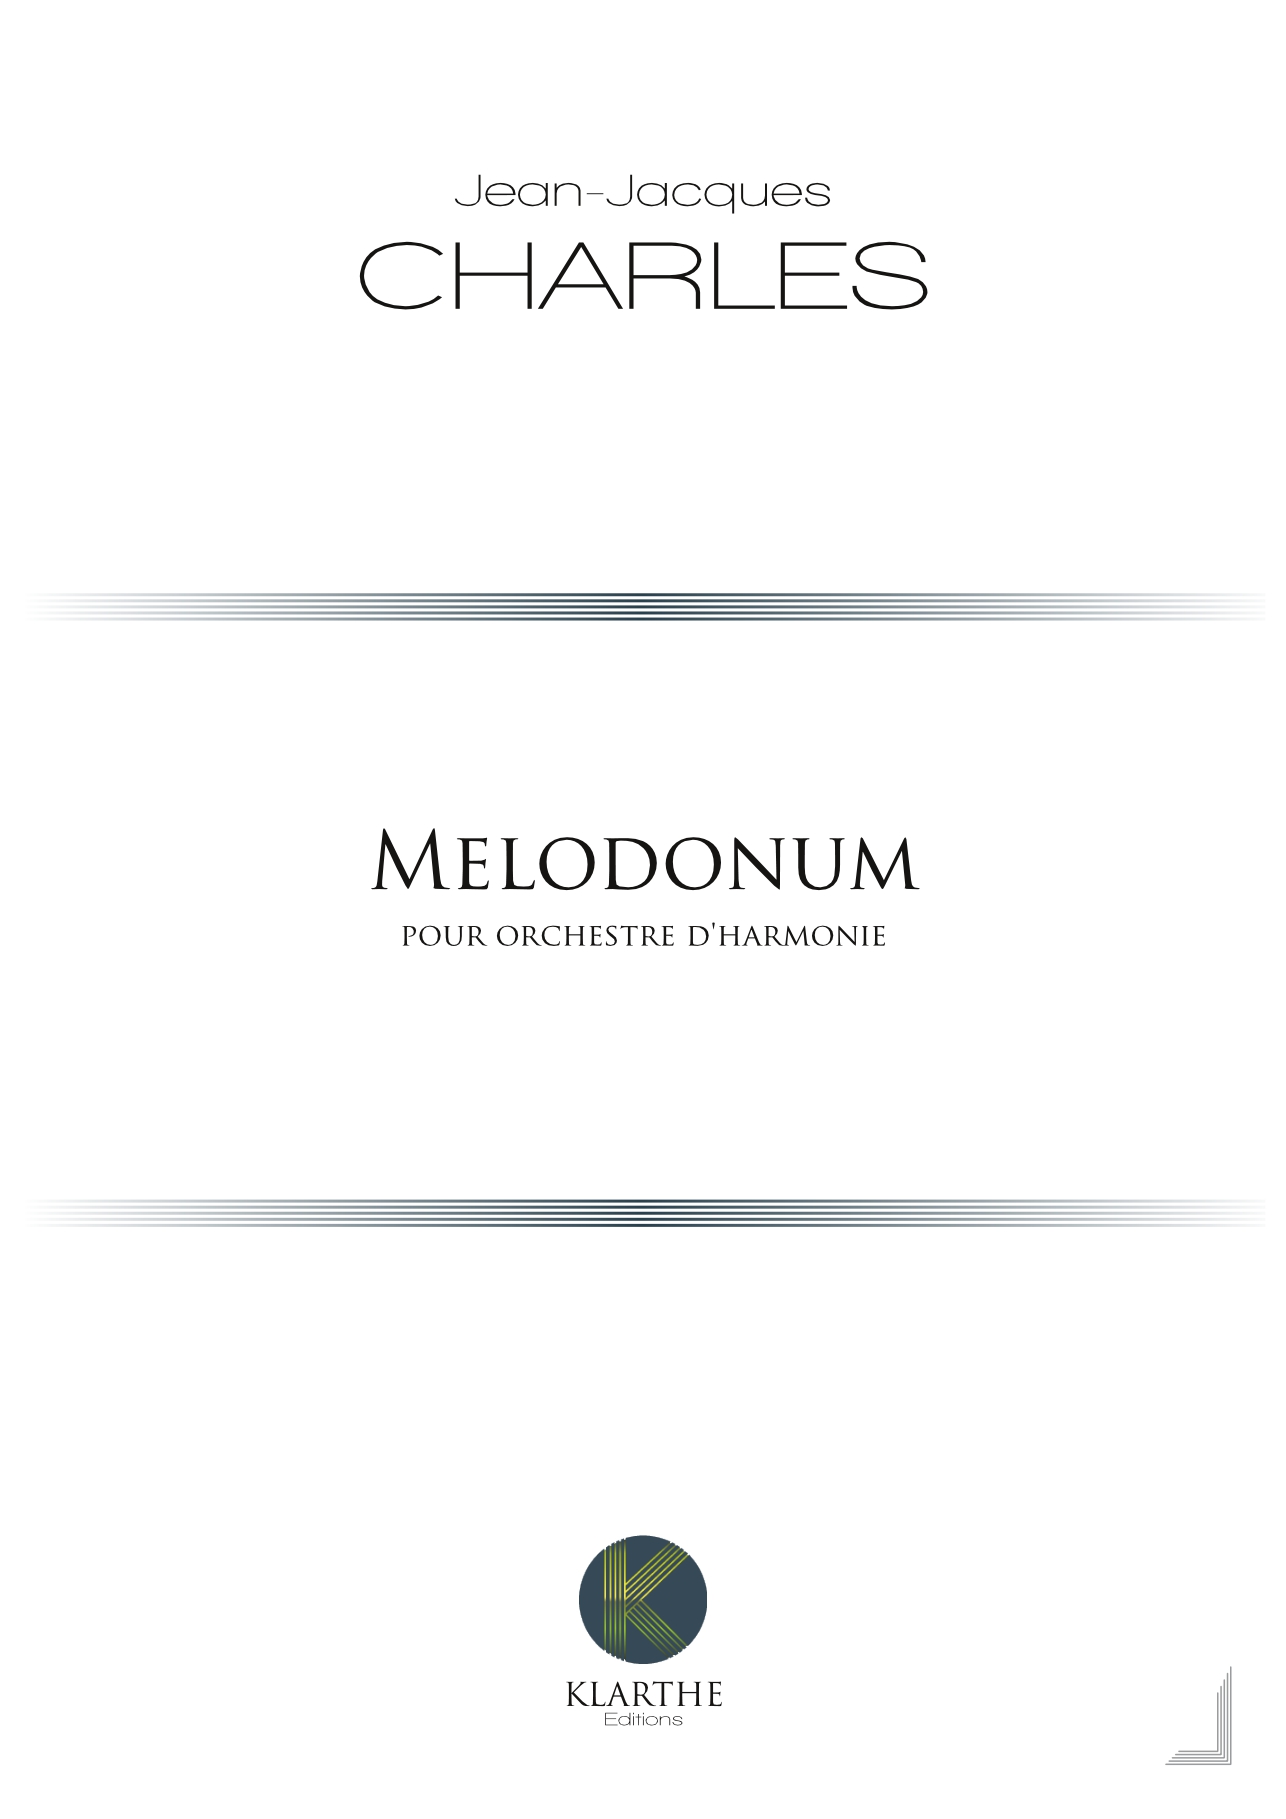 Melodonum (CHARLES JEAN-JACQUES)